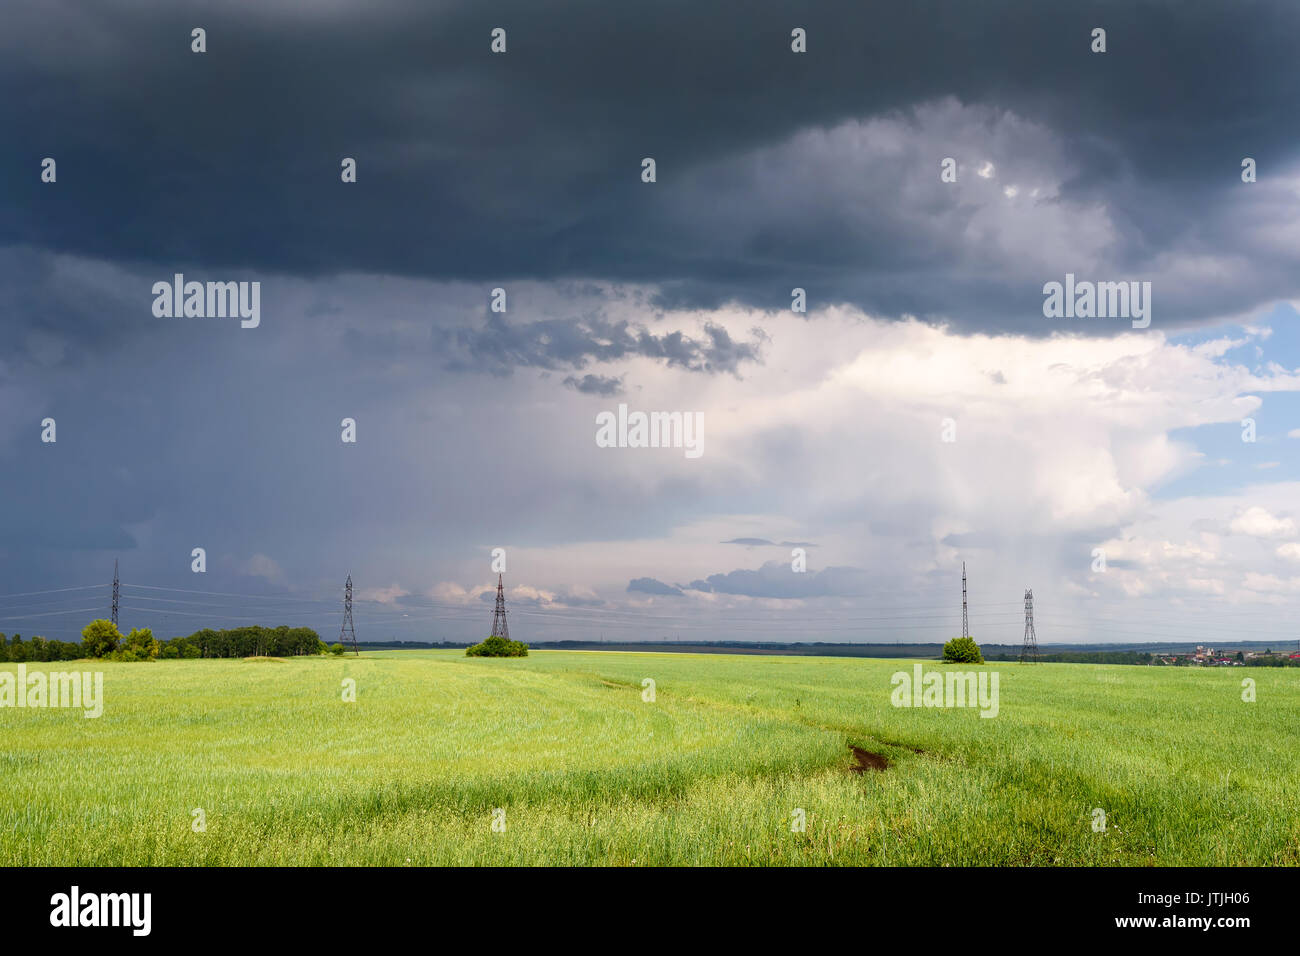 Dramatic Scene: Coming Heavy Thunderstorm over Meadow at Summer Day Stock Photo